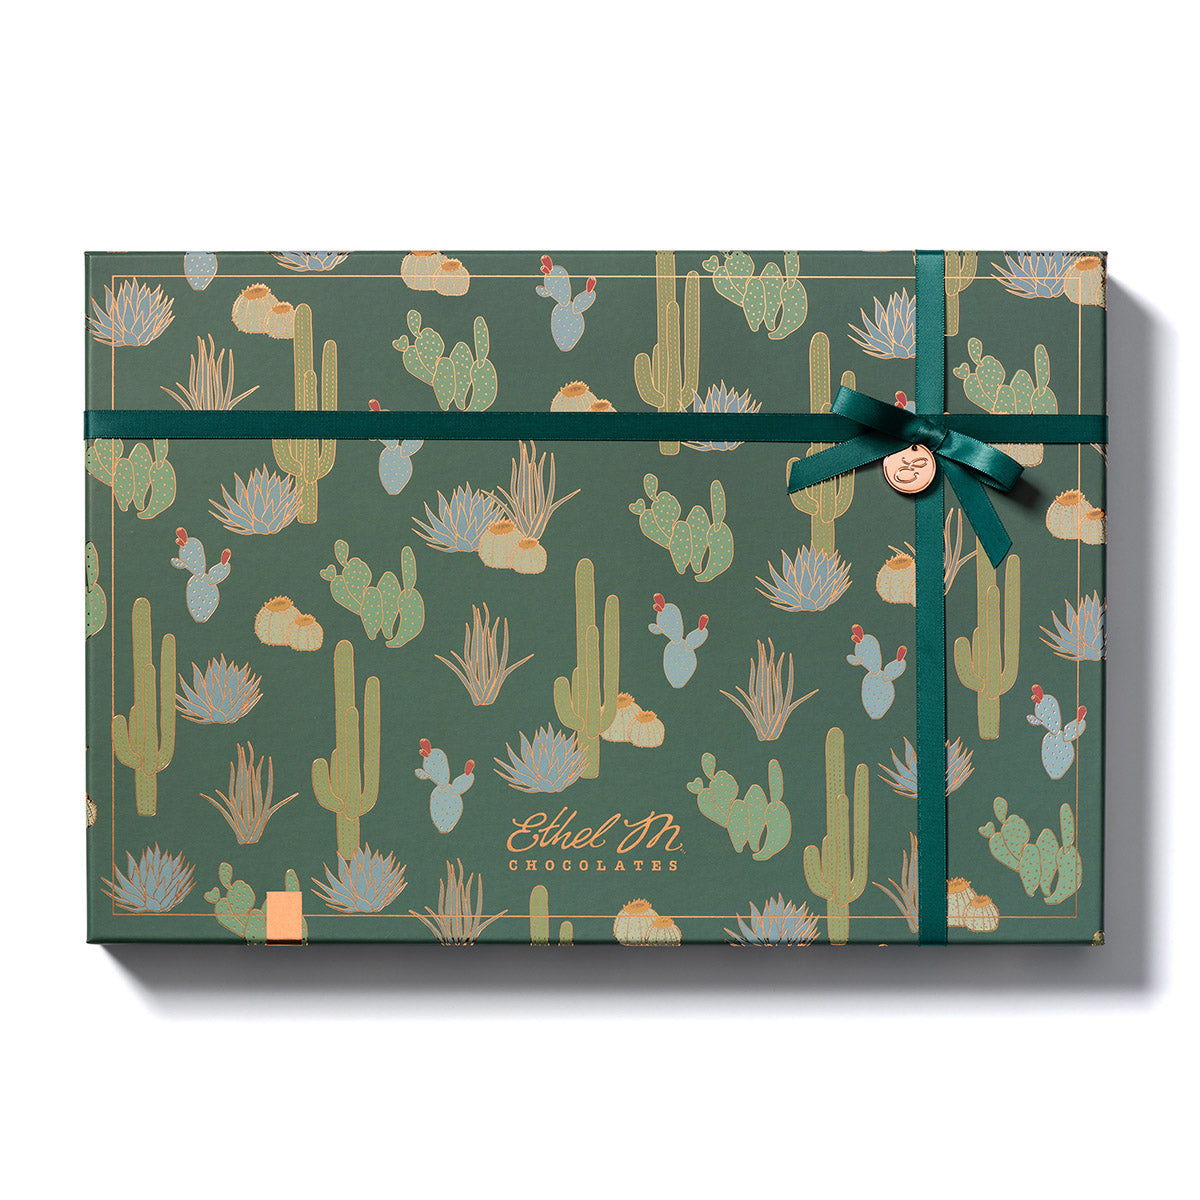 Mix and Match your Most Favorite Ethel M Chocolate Pieces in this Elegant Cactus Custom 40 Piece Gift Box.